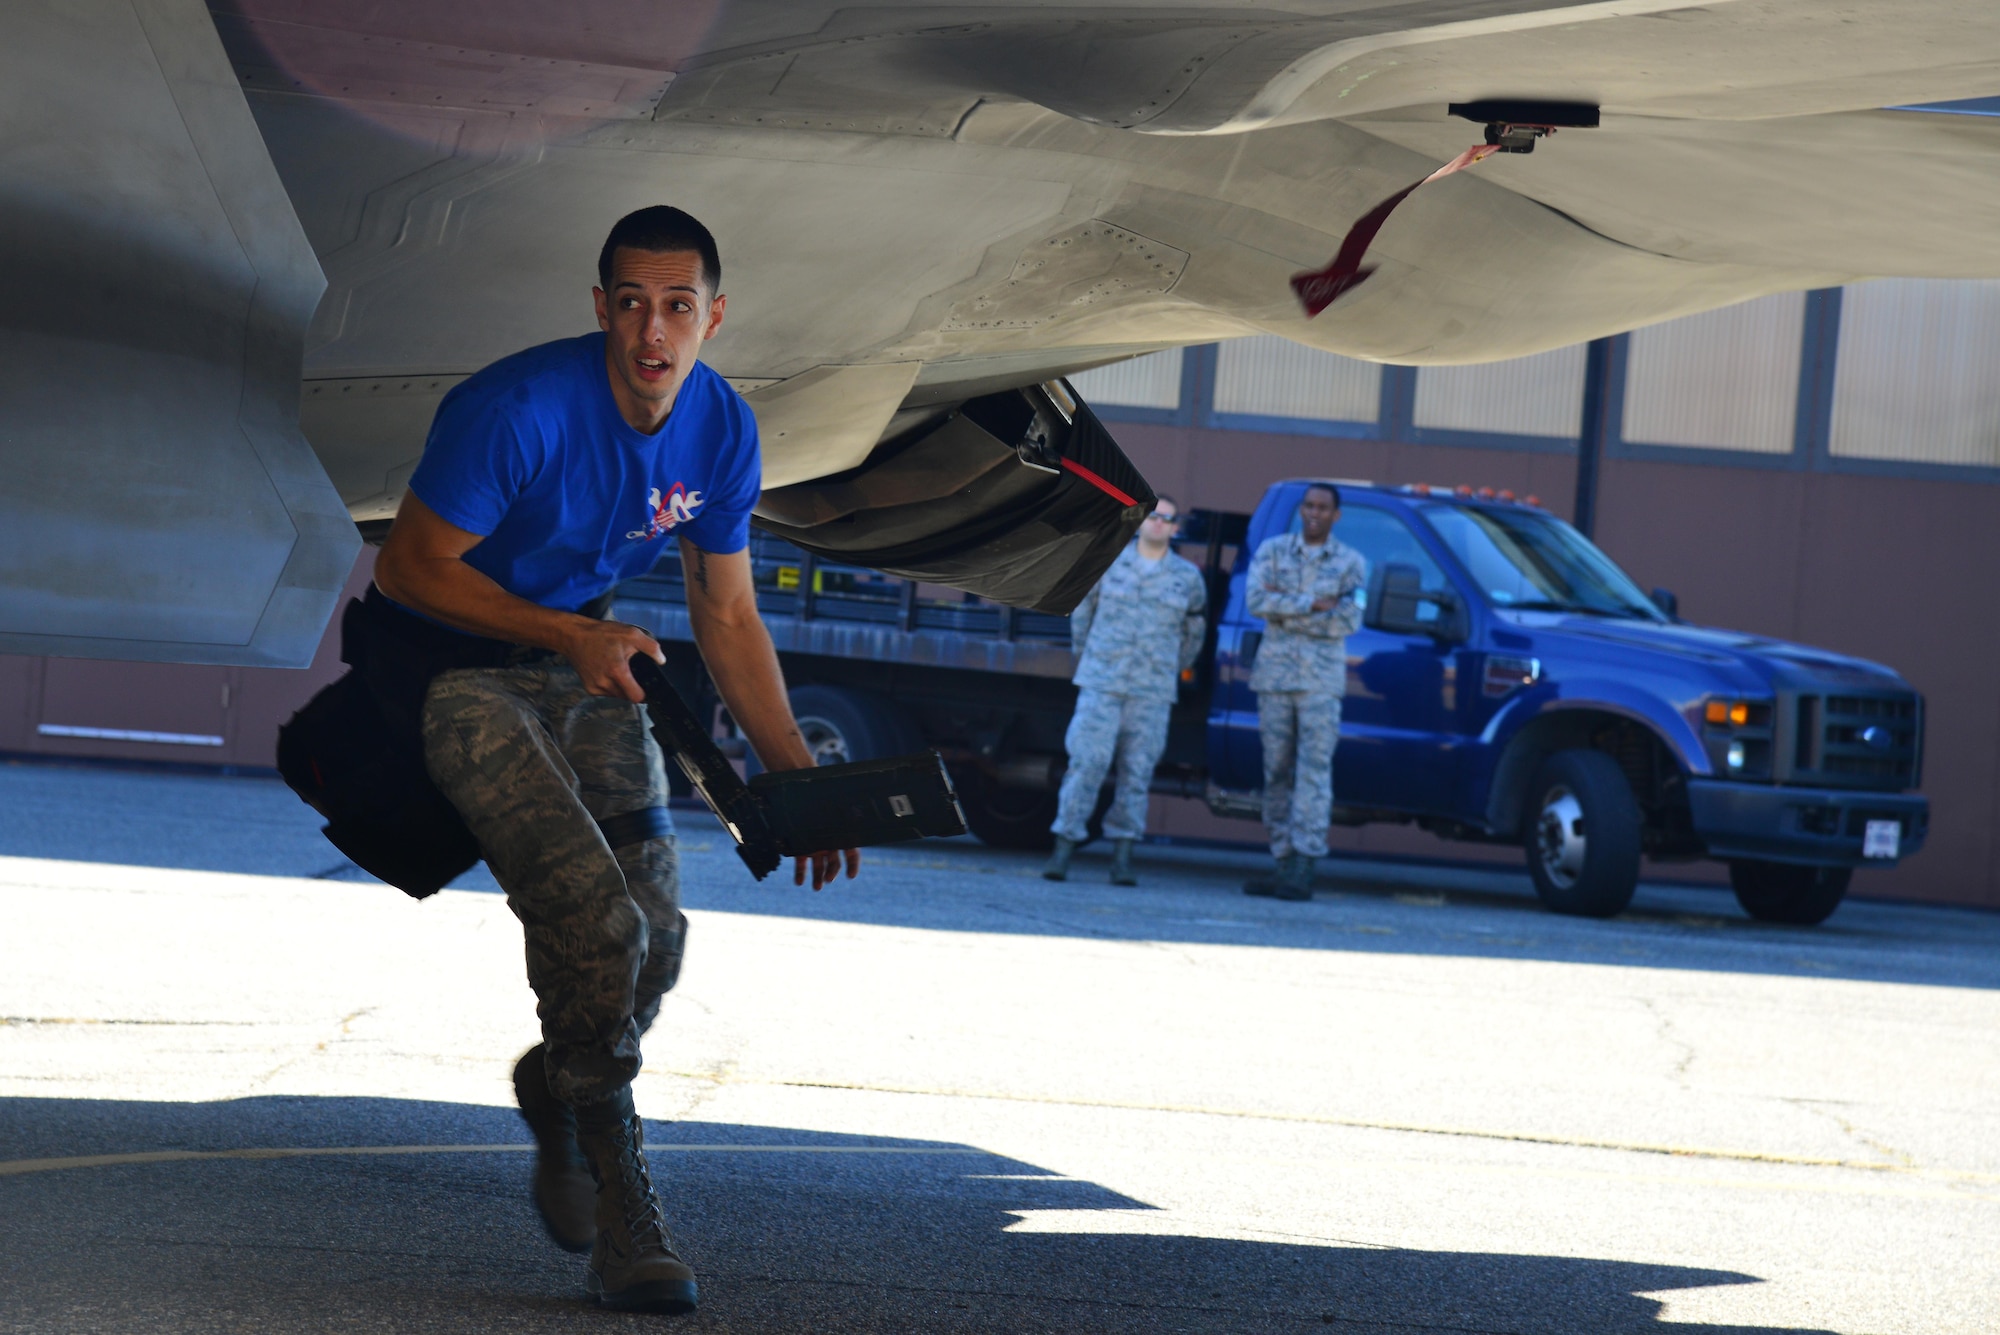 U.S. Air Force Staff Sgt. Alex Ponzi, 94th Aircraft Maintenance Unit weapons load crew chief, competes during the 1st Maintenance Squadron Weapons Load Crew of the Quarter competition at Joint Base Langley-Eustis, Va., Oct. 28, 2016. Weapons load crews worked in three-person teams to inspect and load munitions onto aircraft in a timely and accurate manner. (U.S. Air Force photo by Airman 1st Class Tristan Biese)